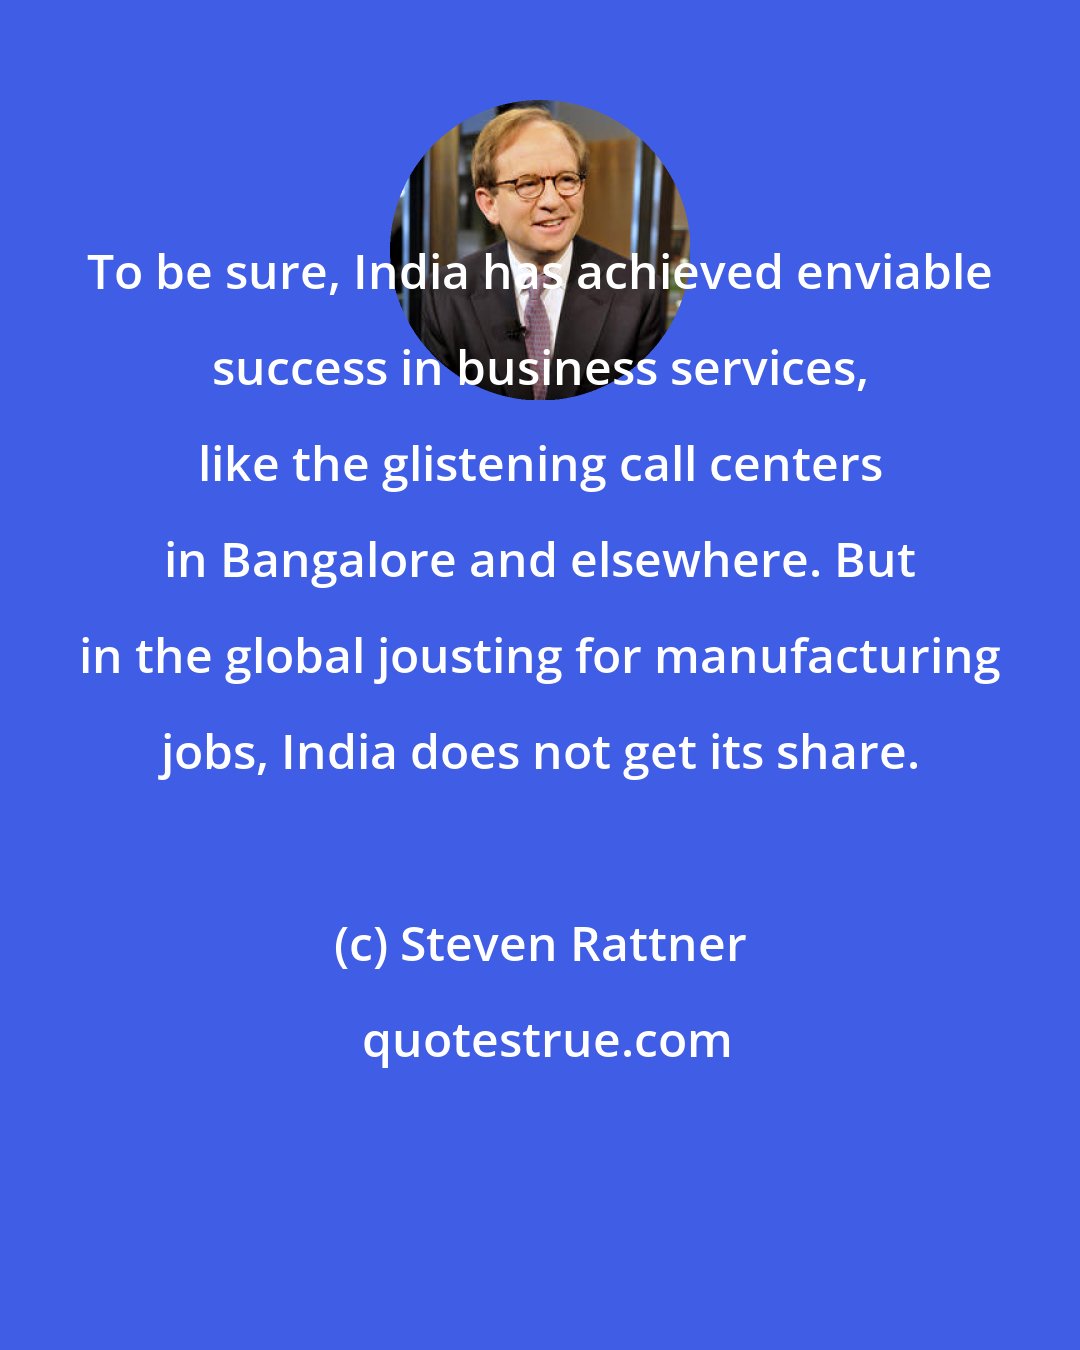 Steven Rattner: To be sure, India has achieved enviable success in business services, like the glistening call centers in Bangalore and elsewhere. But in the global jousting for manufacturing jobs, India does not get its share.